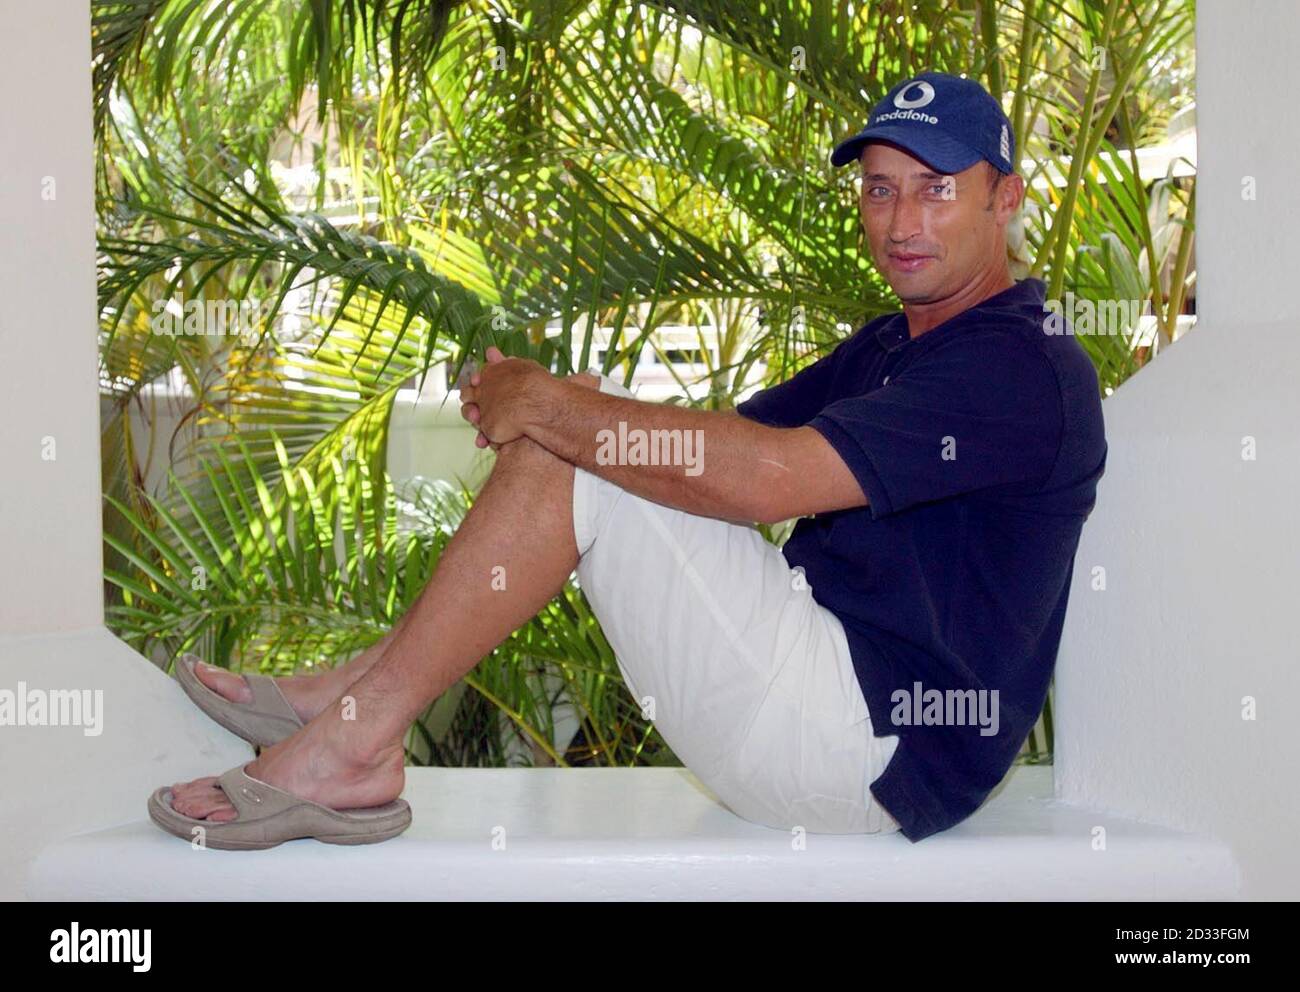 England batsman and former captain Nasser Hussain relaxes at the team hotel, Worthing, Barbados. England have won the Test series against the West Indies, leading 3-0 with the 4th and final match to be played in Antigua on Saturday.  Stock Photo